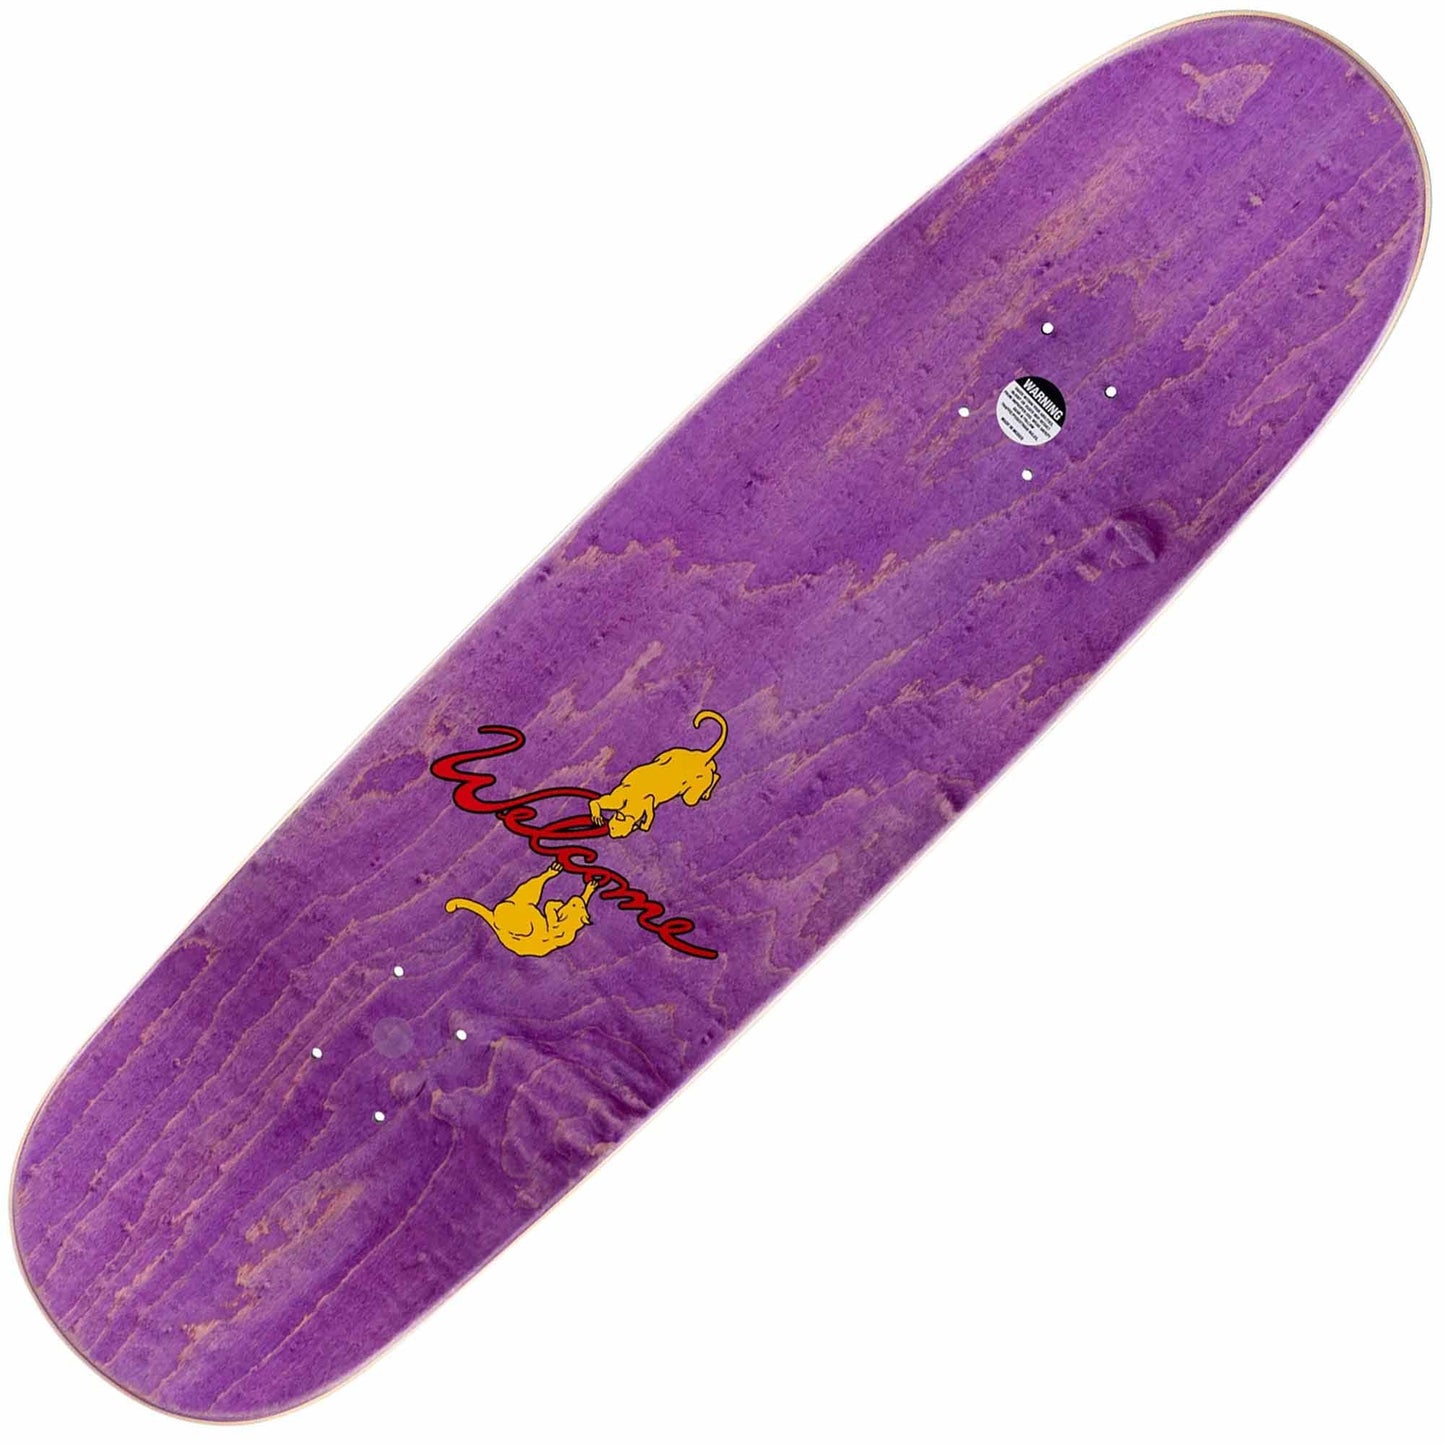 Welcome Nora Special Effects Sphynx Deck (8.8") - Tiki Room Skateboards - 2